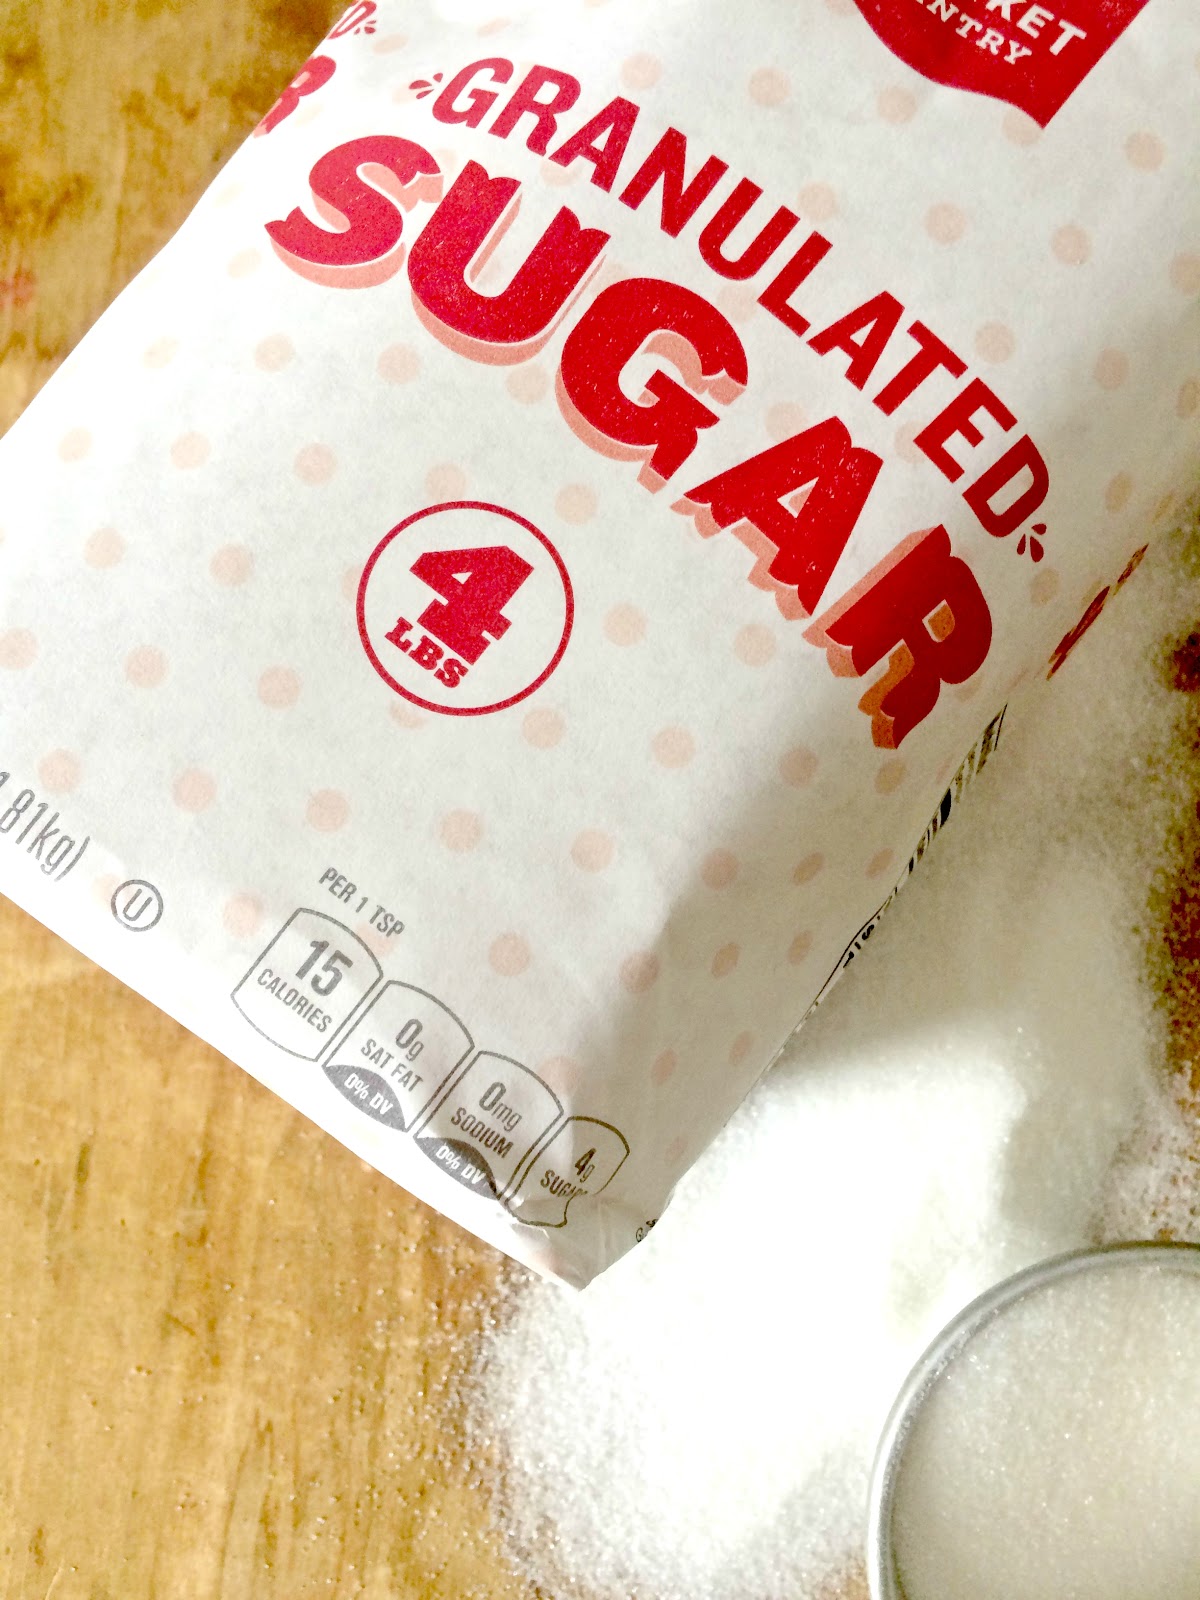 Heaven can wait : Sugar Addiction And How To Break It